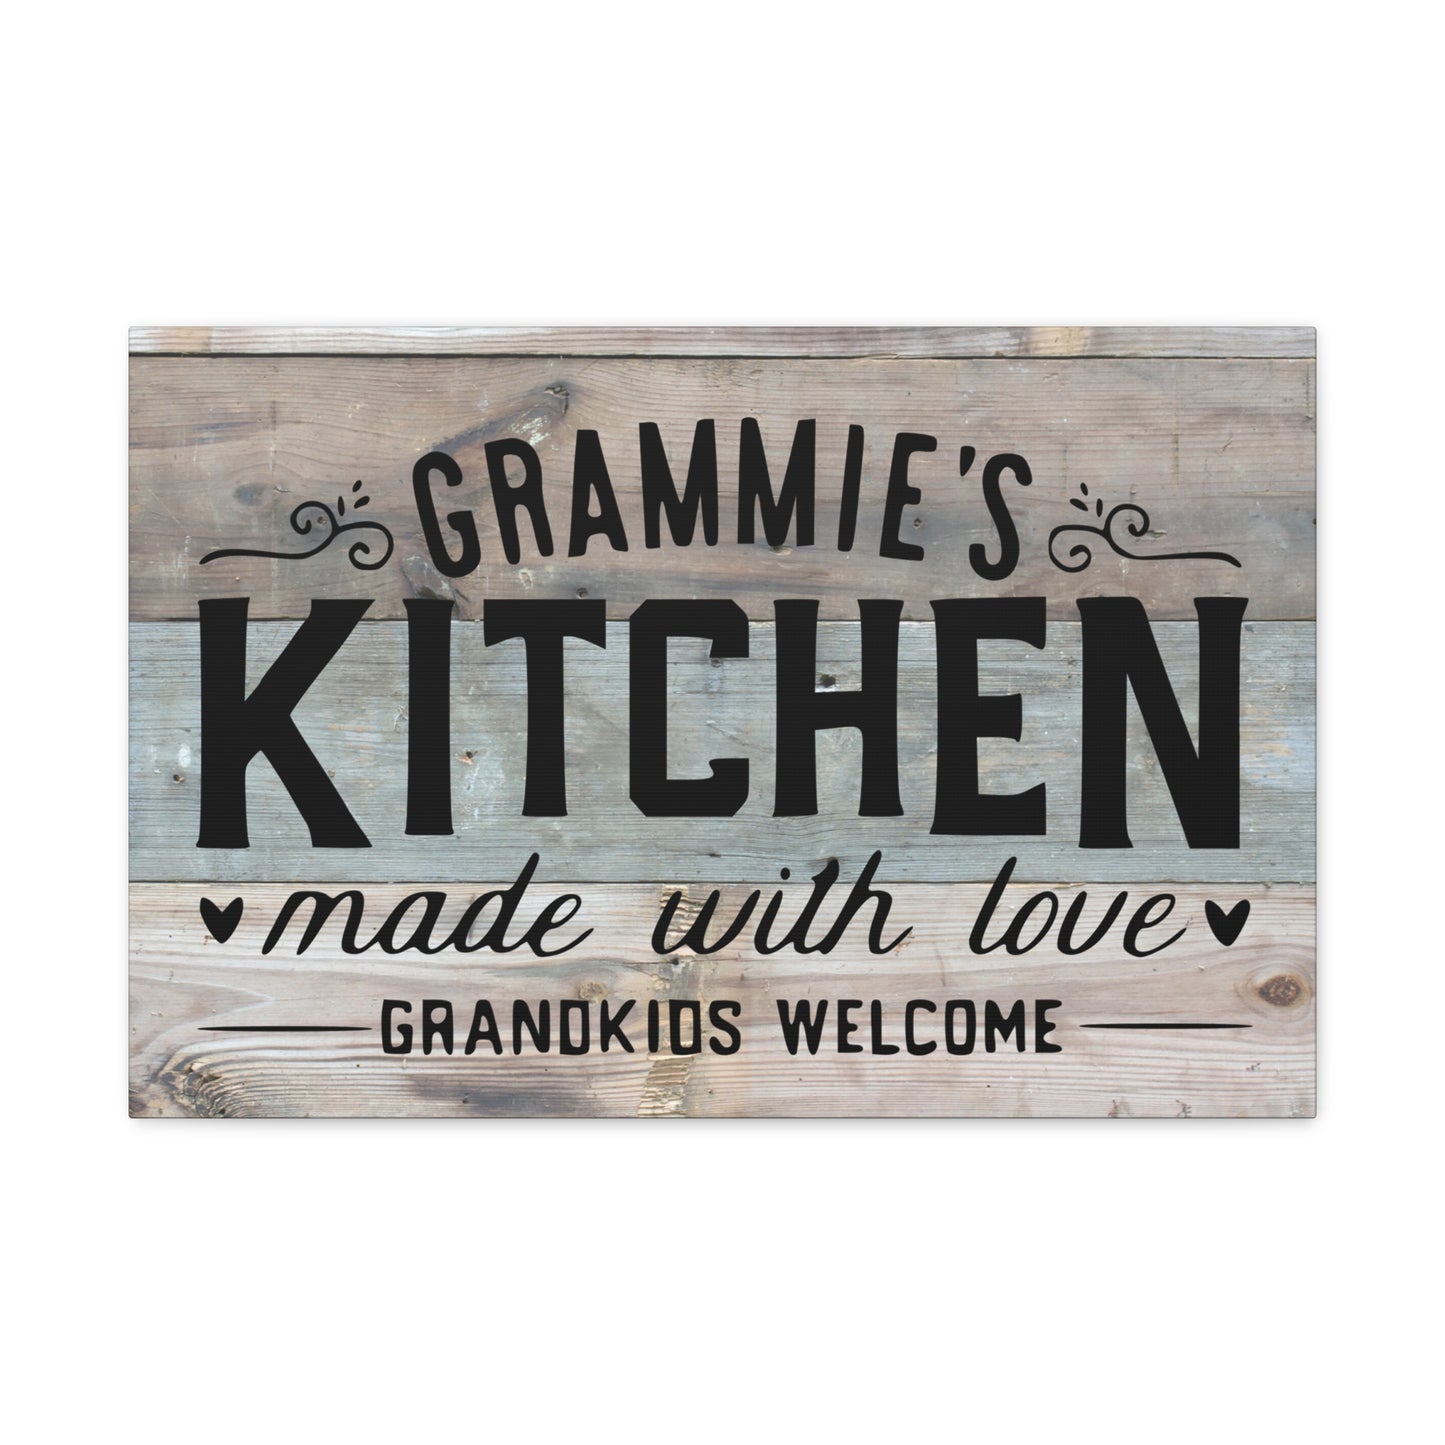 "High-detail grandmother kitchen canvas with solid support face"